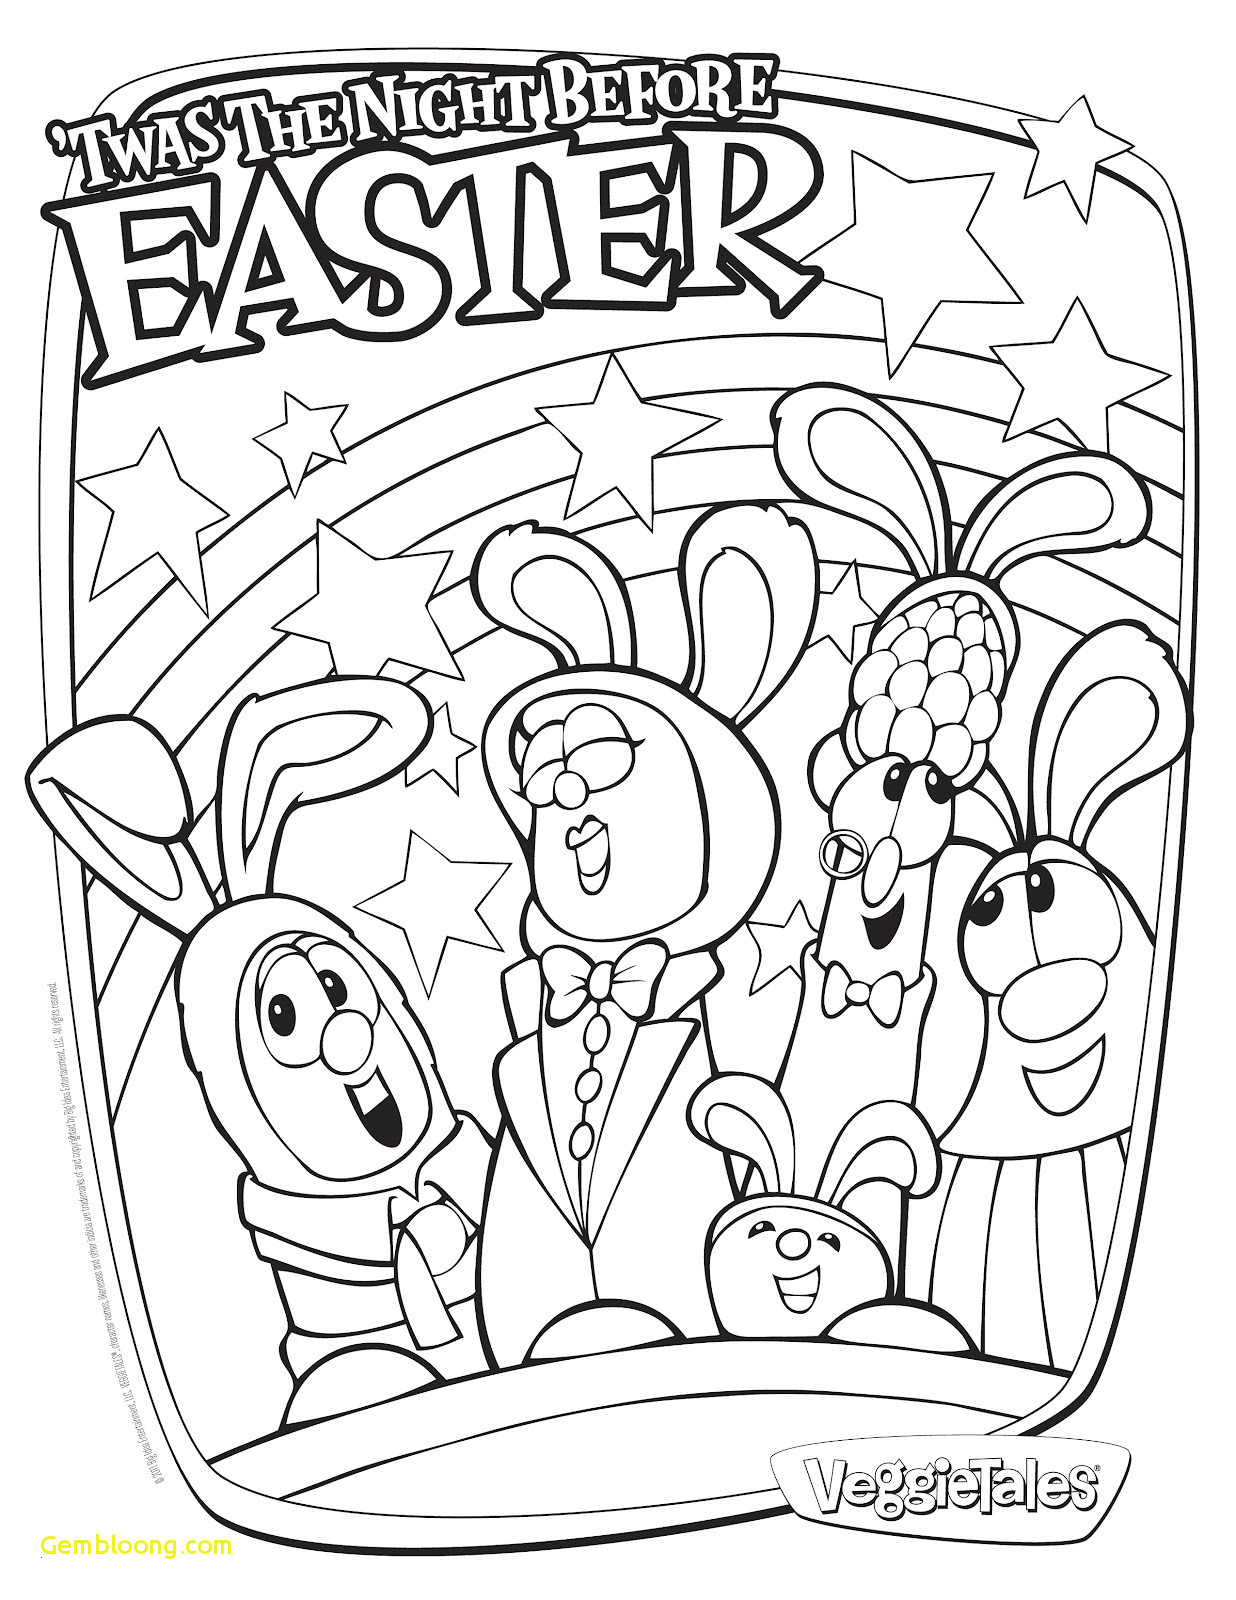 30 children drawing book expert jesus with children coloring pages coloring pages jesus amazing